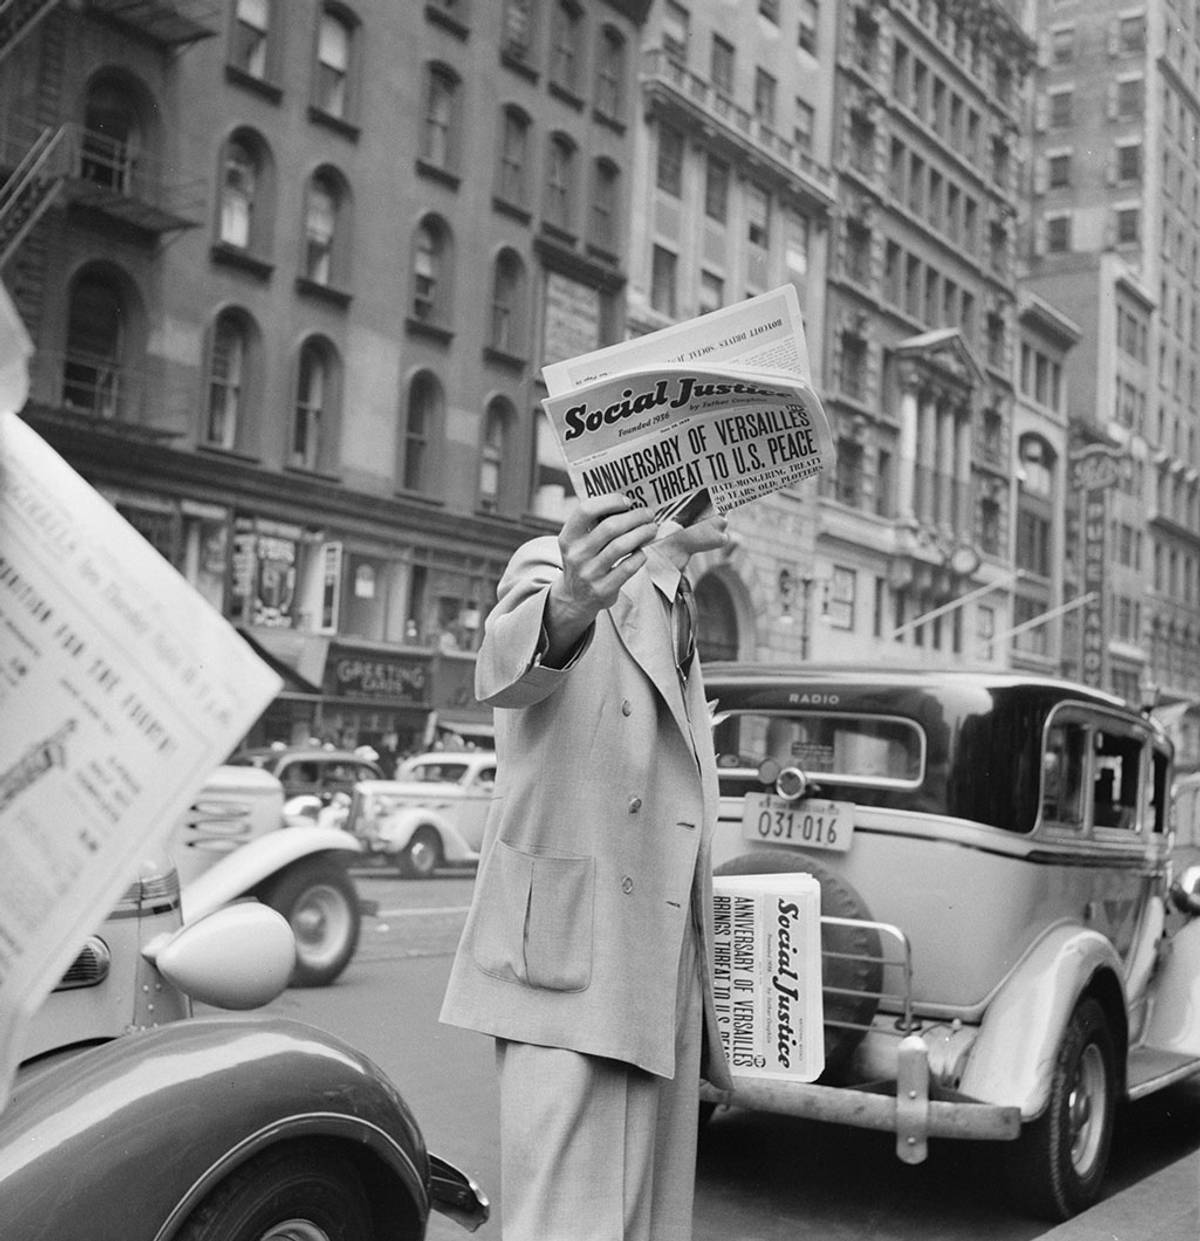 ‘Social Justice,’ founded by Father Coughlin, sold on important street corners and intersections. New York City, 1939. (Photo: Dorothea Lange/Library of Congress)